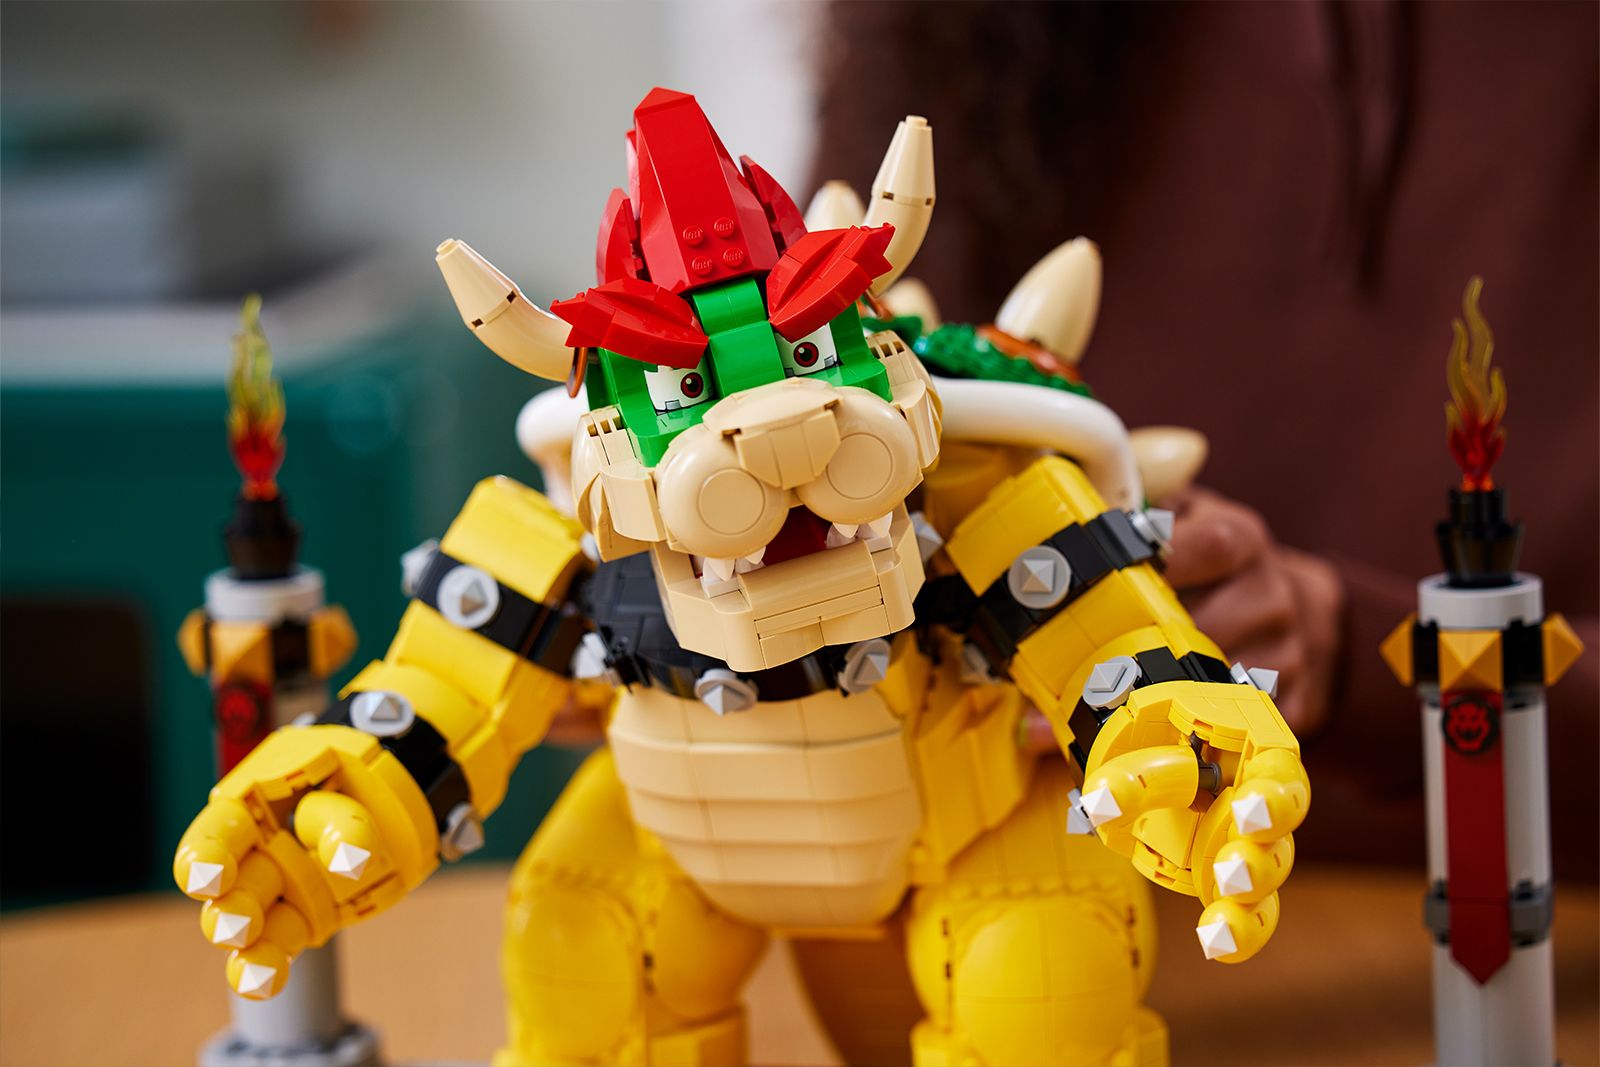 Lego's Mighty Bowser set offers a proper boss fight for Mario photo 2